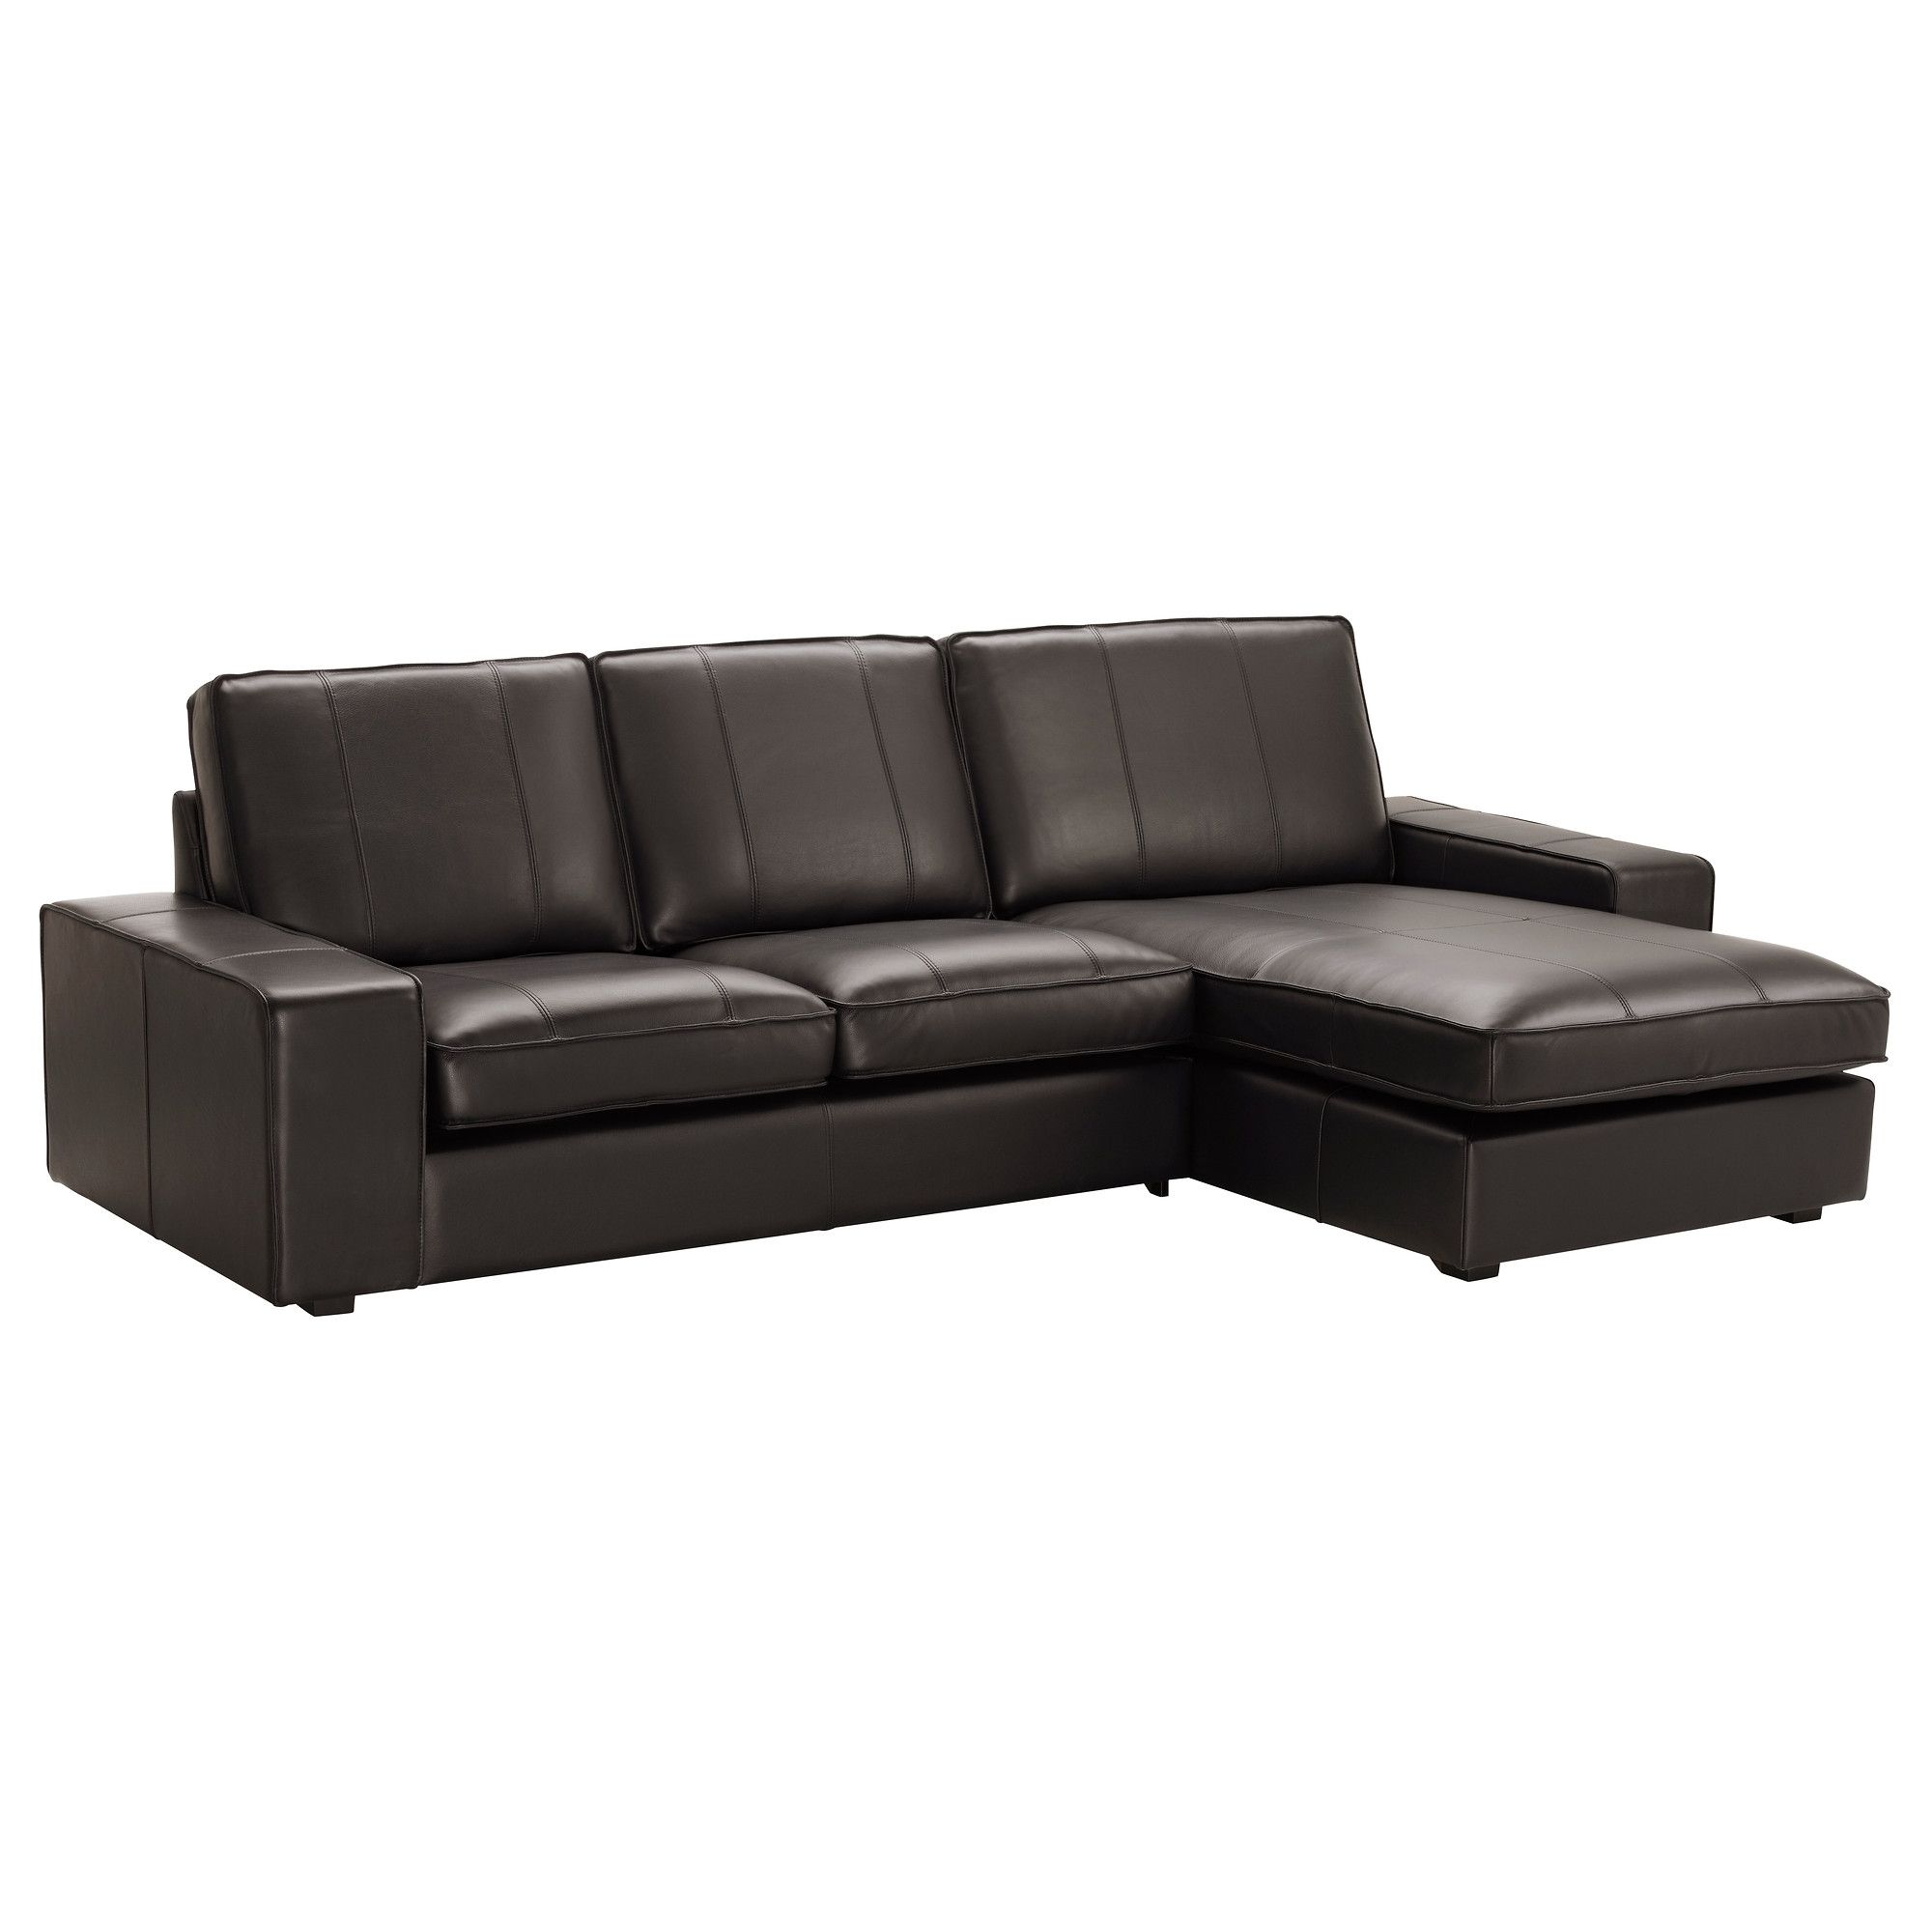 Most Recent Ikea Chaise Sofas Throughout Kivik Sofa – With Chaise/grann/bomstad Black – Ikea (Photo 5 of 15)